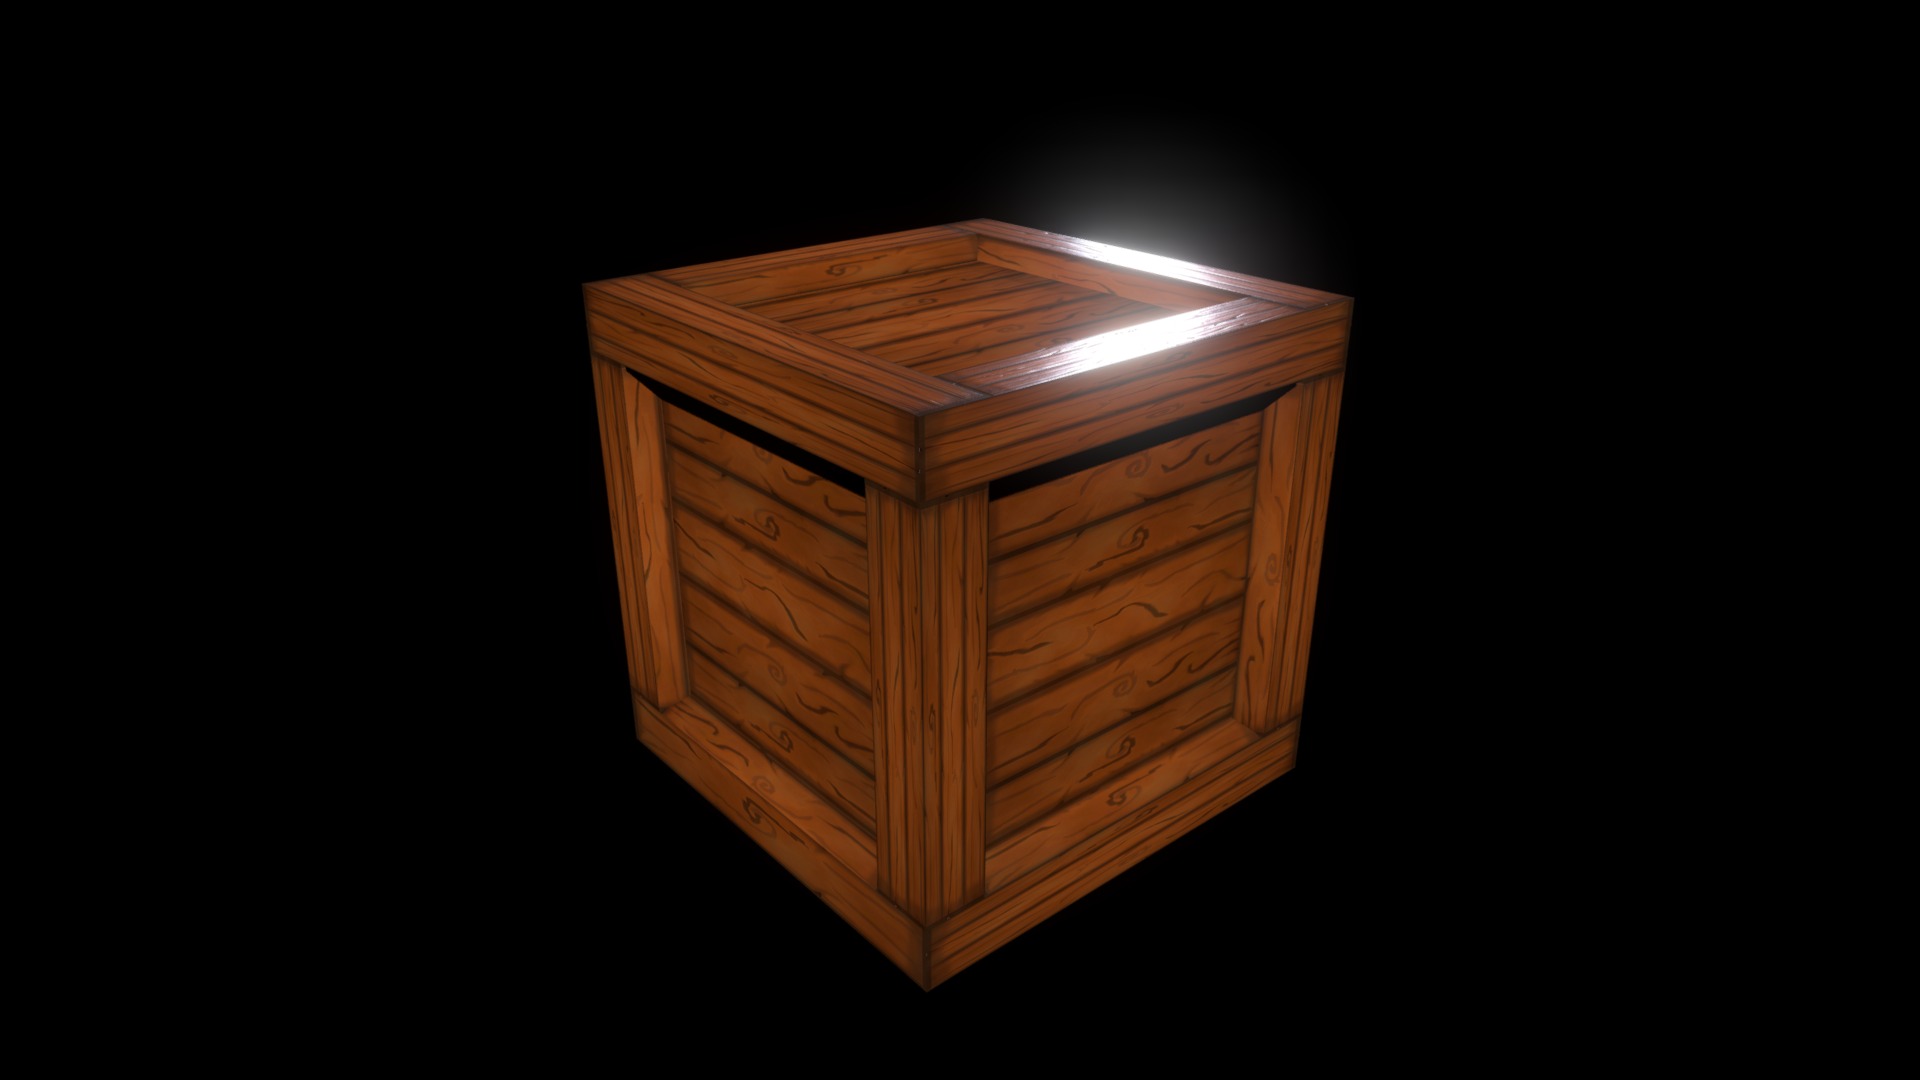 3D model Crate with hand painted wood texture - This is a 3D model of the Crate with hand painted wood texture. The 3D model is about a wooden box with a light on top.